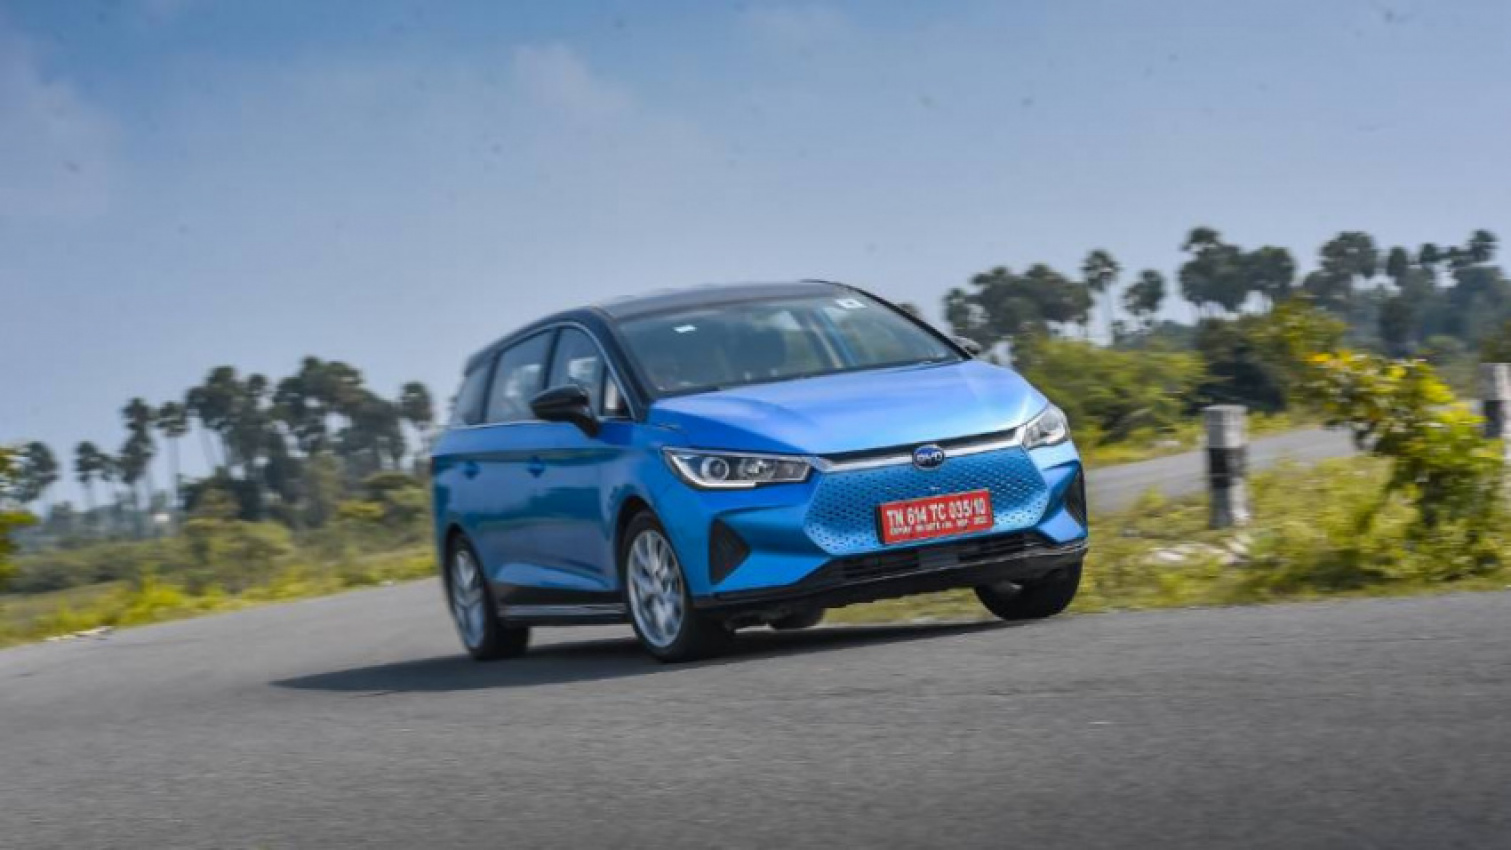 autos, byd, cars, reviews, android, byd e6, byd e6 7 seater, byd e6 charging time, byd e6 cities, byd e6 details, byd e6 electric, byd e6 features, byd e6 india, byd e6 interiors, byd e6 launch india, byd e6 mileage, byd e6 mpv, byd e6 passenger segment, byd e6 price, byd e6 price india, byd e6 range, byd e6 review india, byd e6 specifications, byd e6 test drive india, byd e6 warranty, byd electric mpv india, byd india, byd review india, e6 electric mpv, e6 review, electric vehicles, new cars 2021, overdrive, upcoming cars 2021, android, 2021 byd e6 first drive review